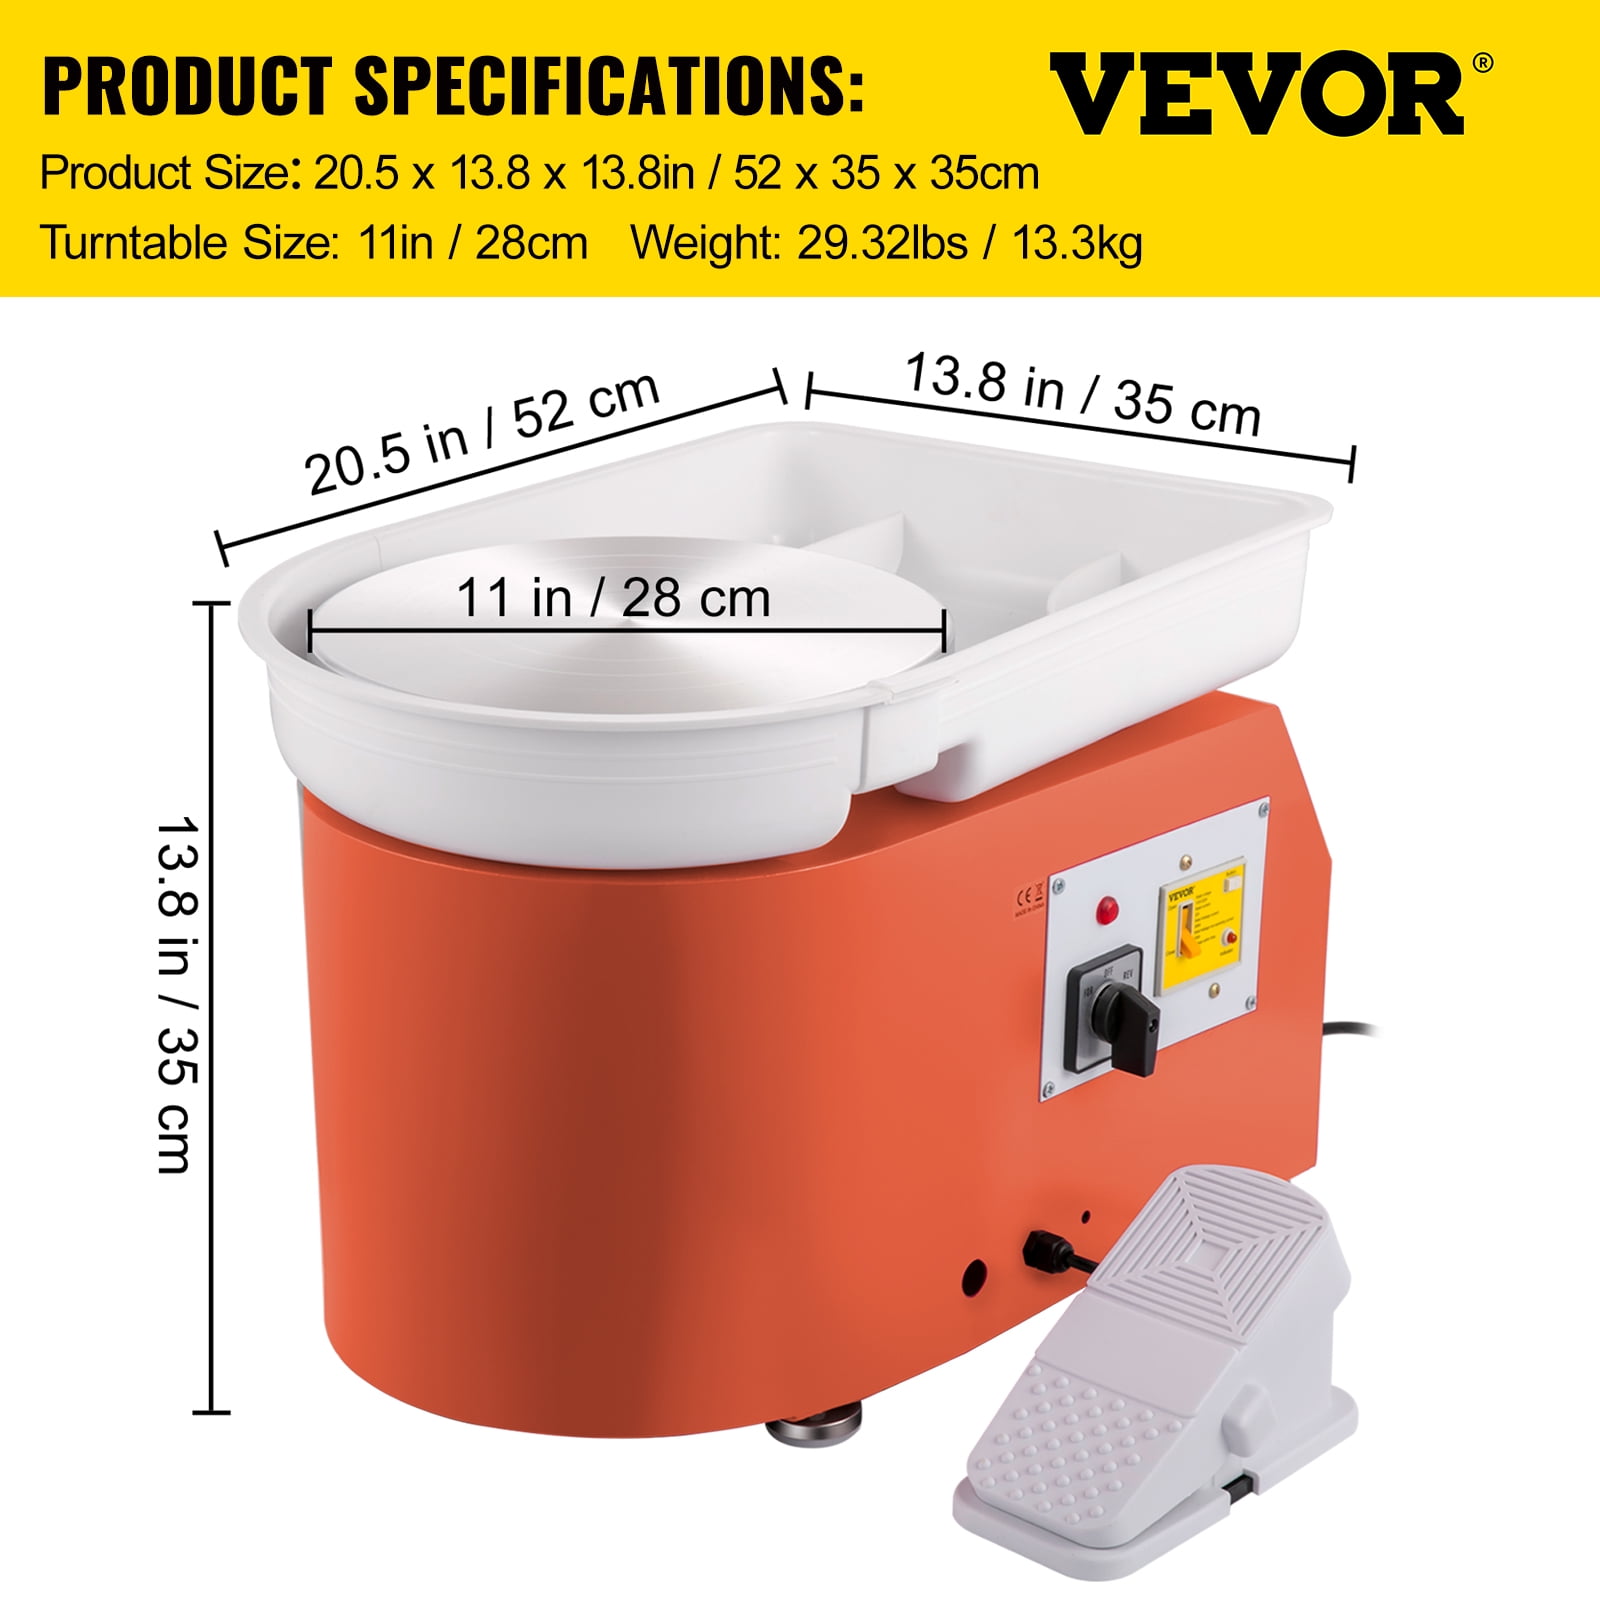 VEVOR Pottery Wheel 28cm Pottery Forming Machine 350W Electric Pottery Wheel with Adjustable Feet Lever Pedal DIY Clay Tool with Tray for Ceramic